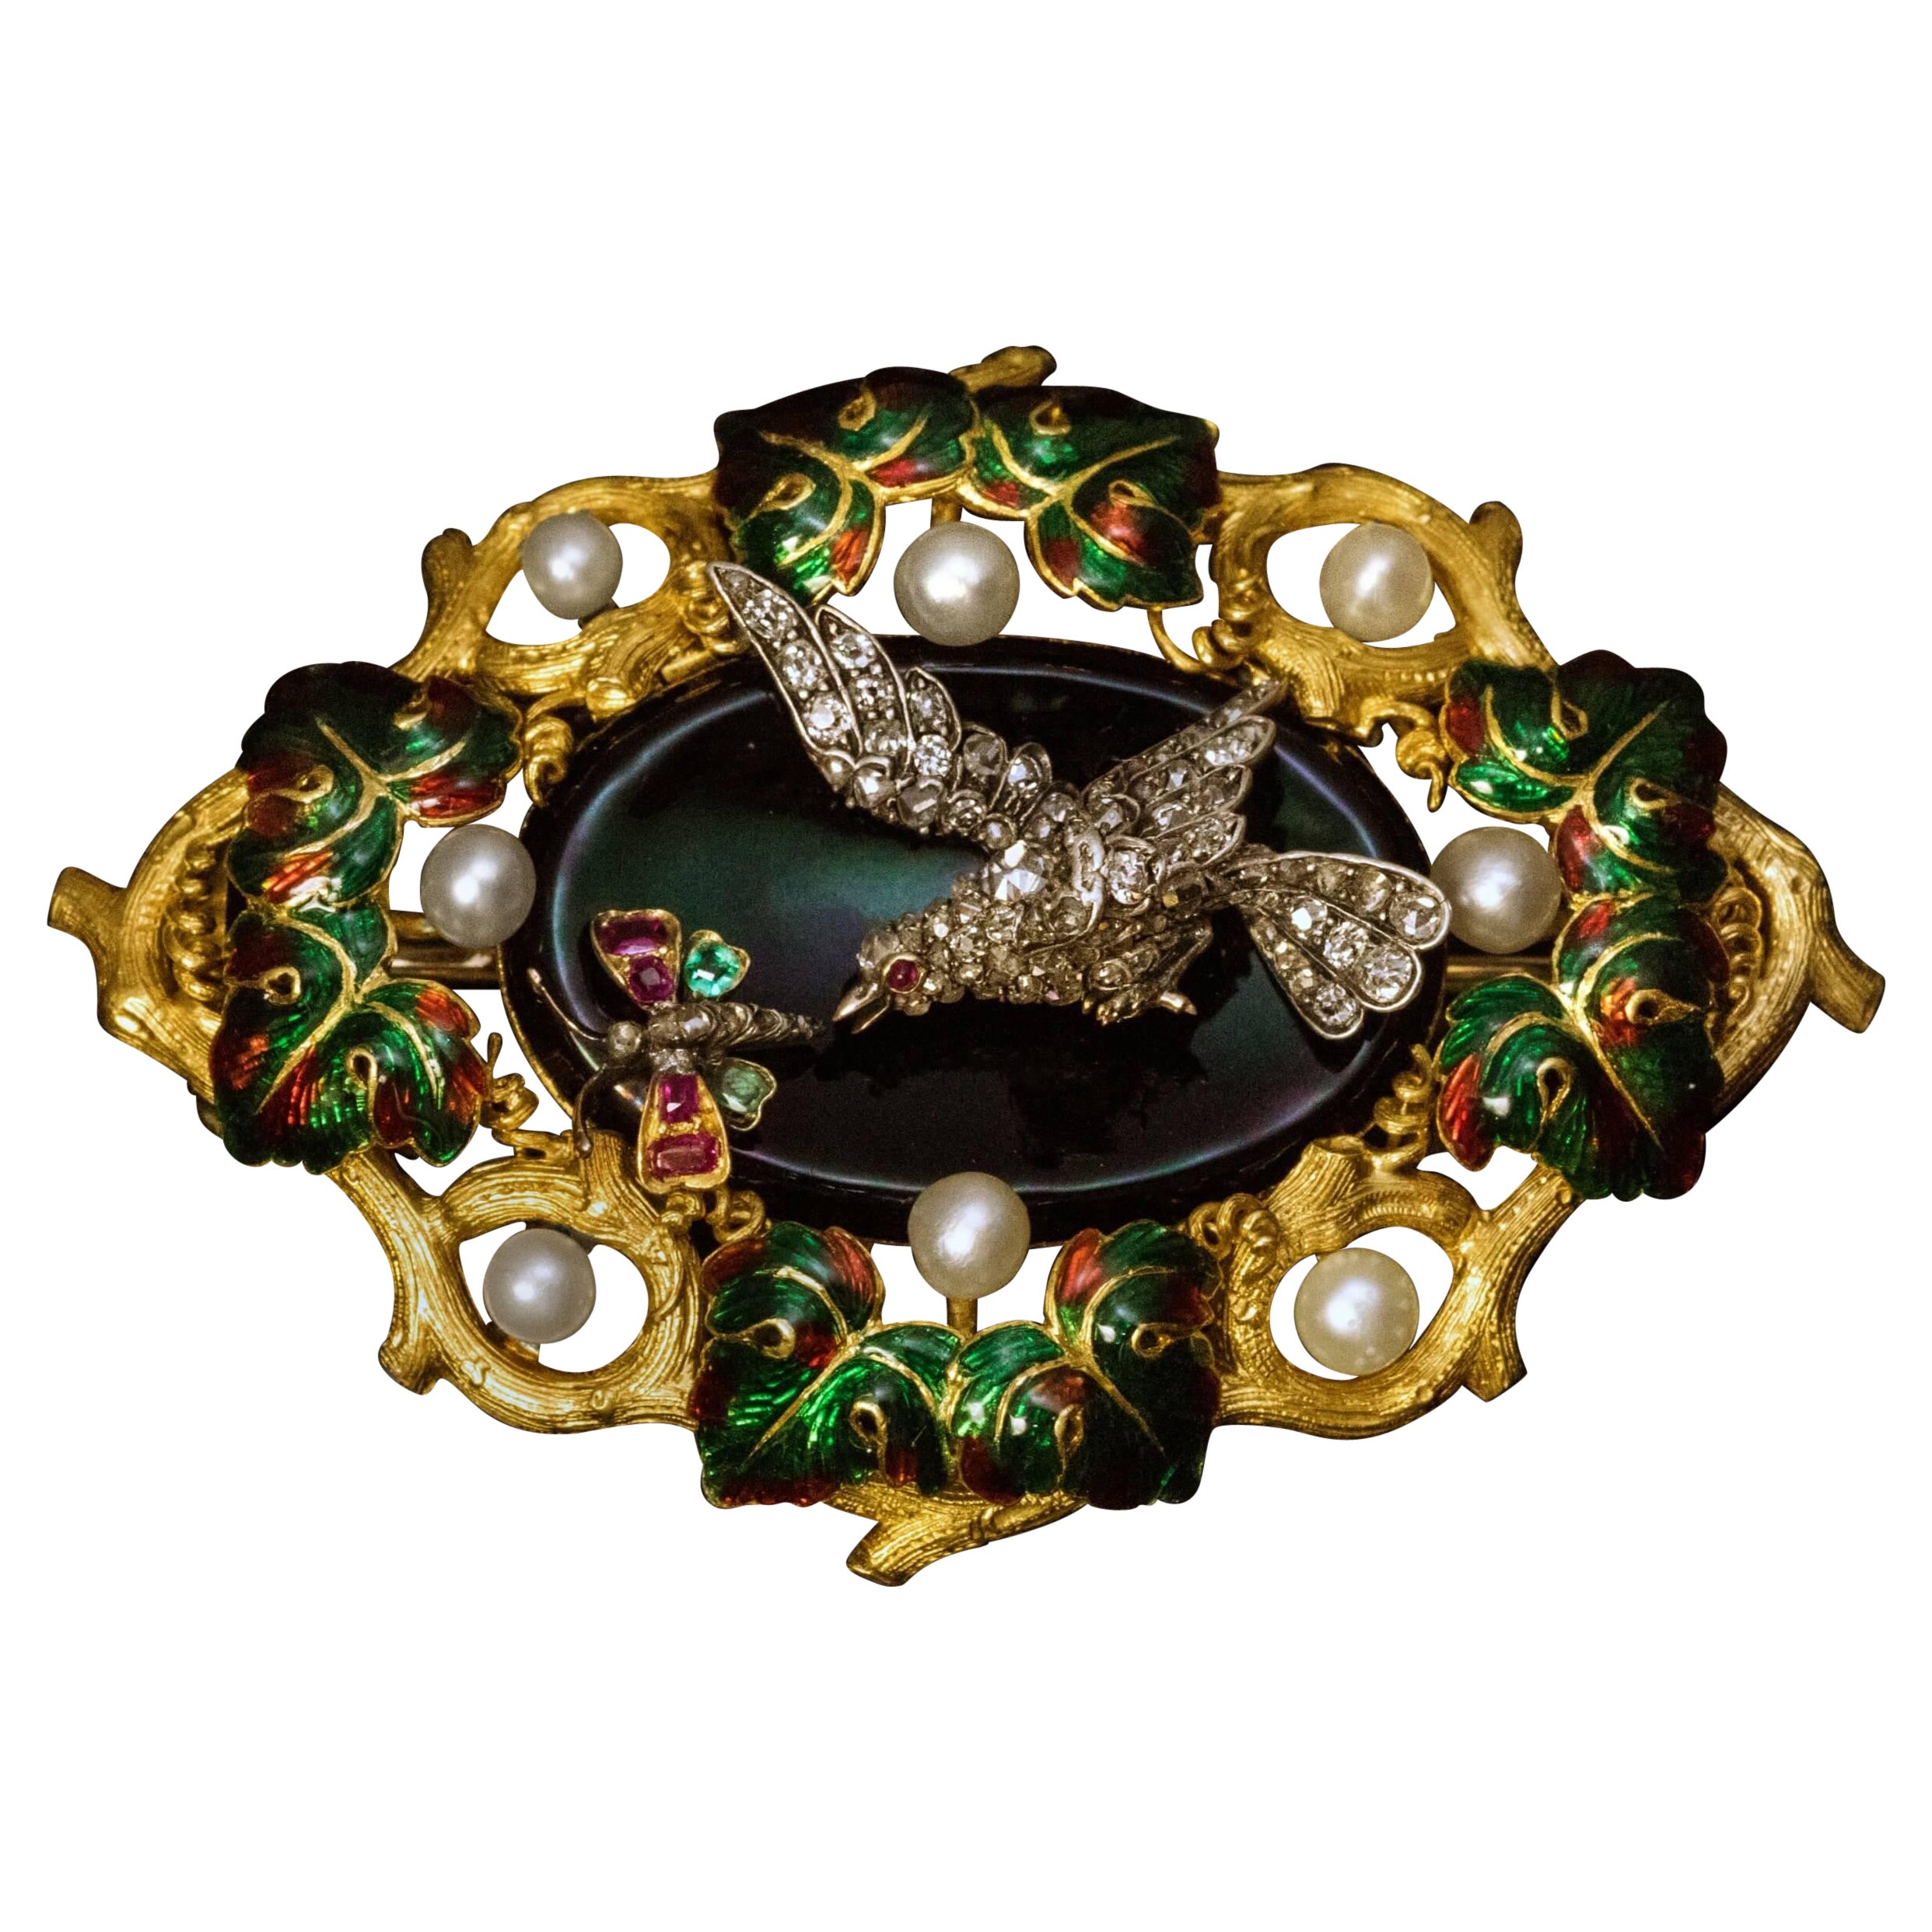 1840s Large Jeweled Gold Enamel Brooch For Sale